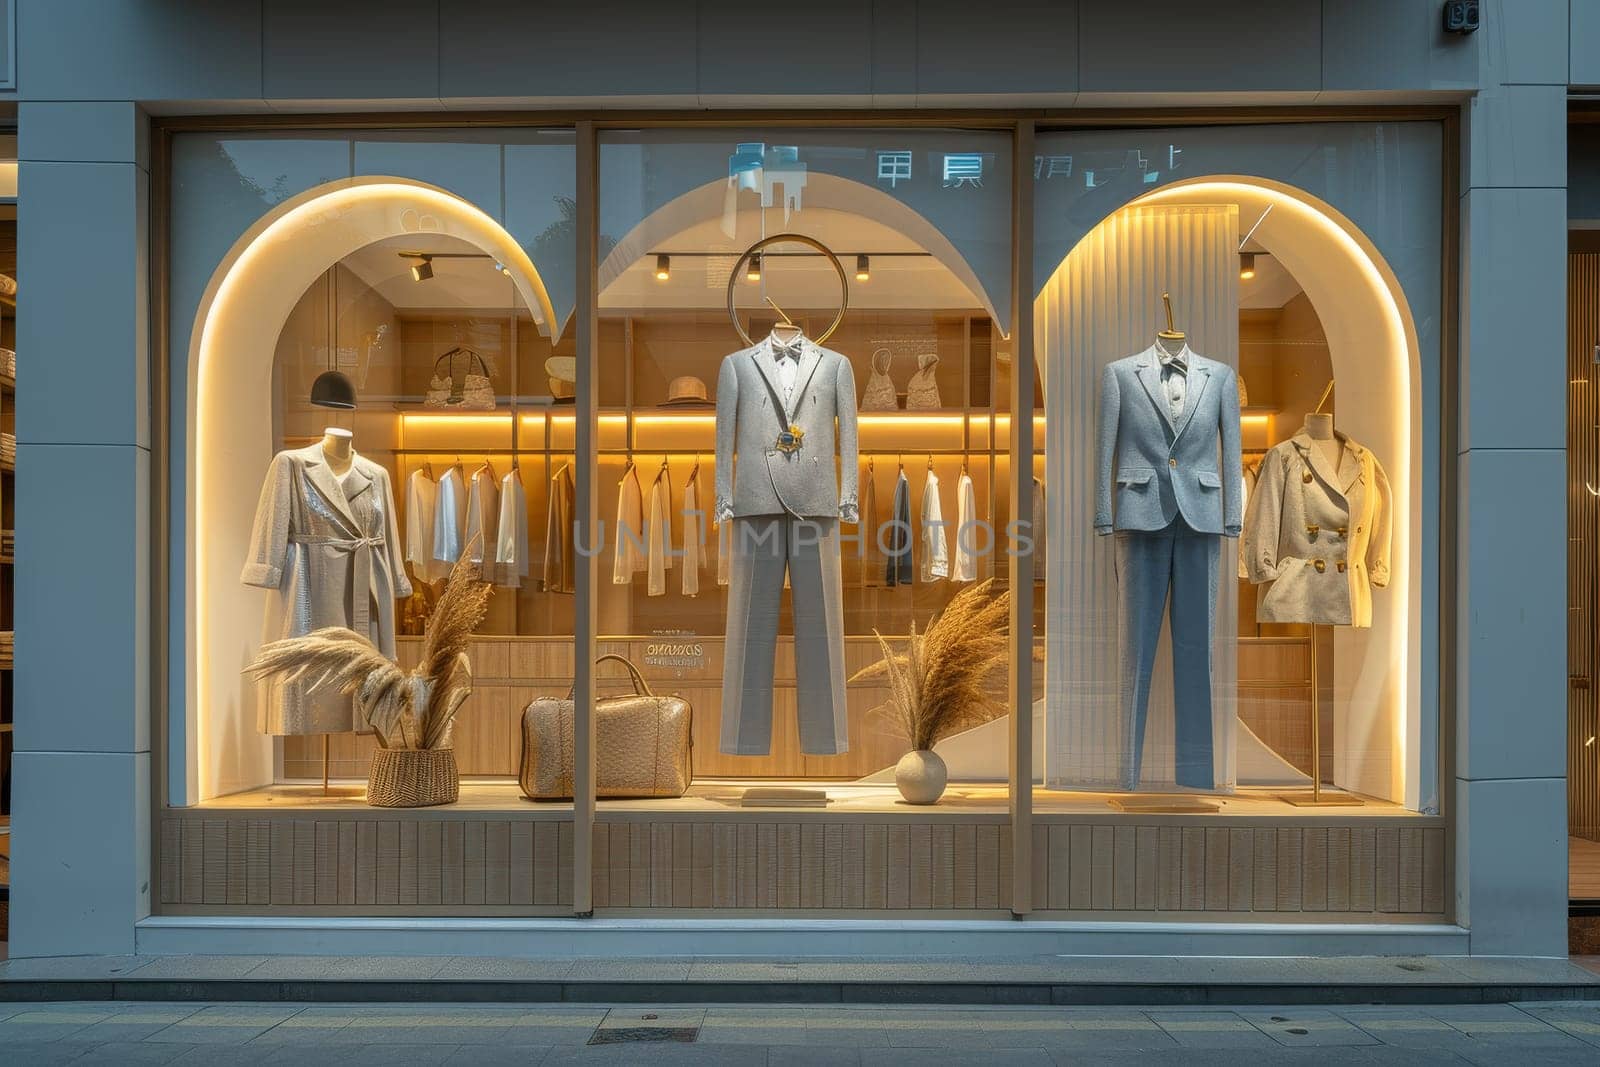 A window display of clothing with a white background. The clothes are hanging on the window and are arranged in a way that they are visible to the passerby. The display is well-lit and inviting